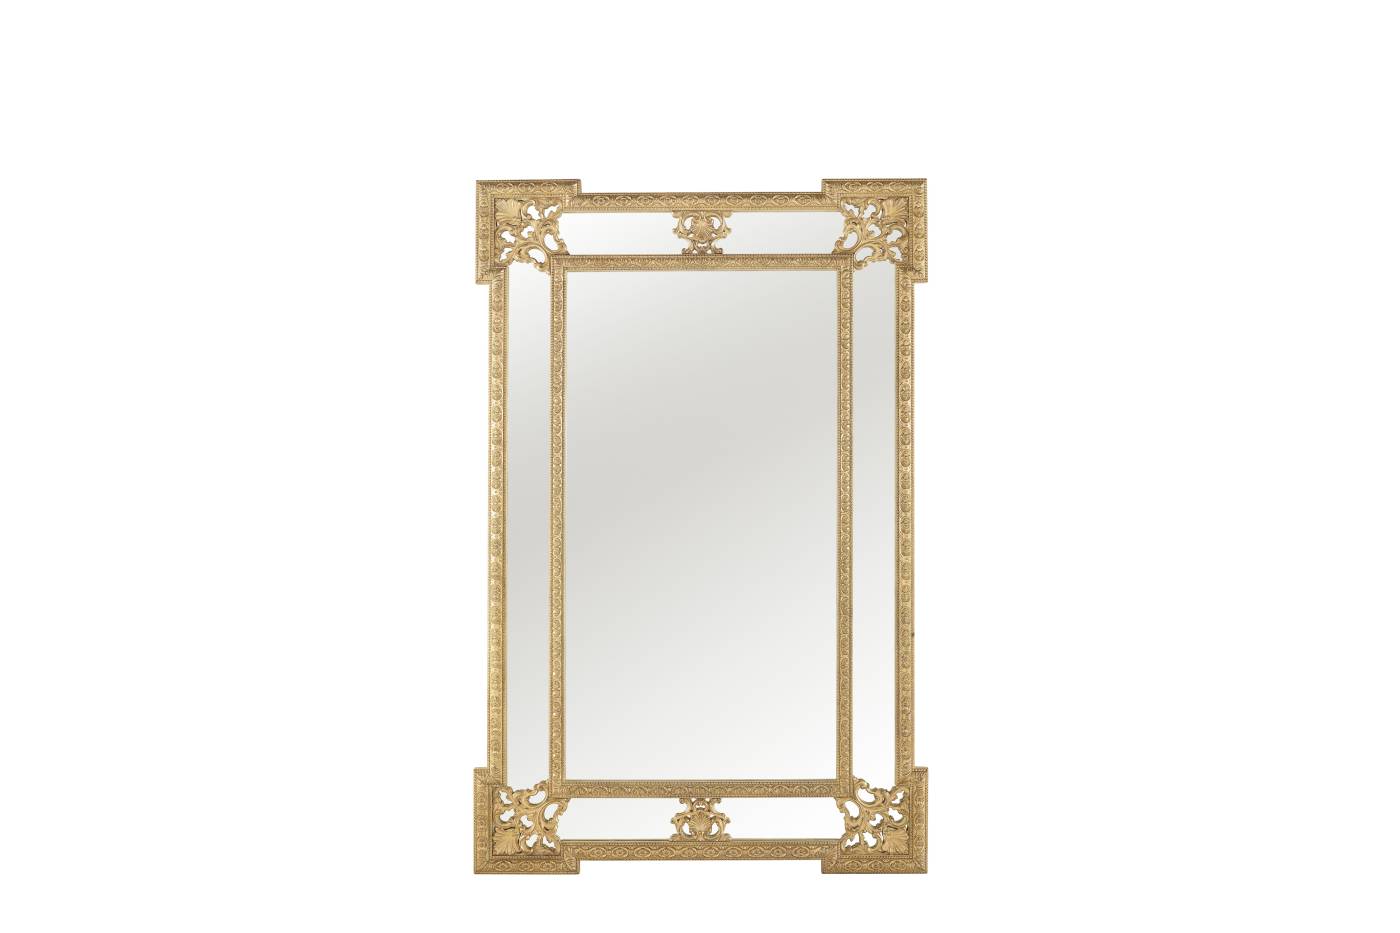 DEDALUS mirror – Jumbo Collection Italian luxury classic MIRRORS. tailor-made interior design projects to meet all your furnishing needs